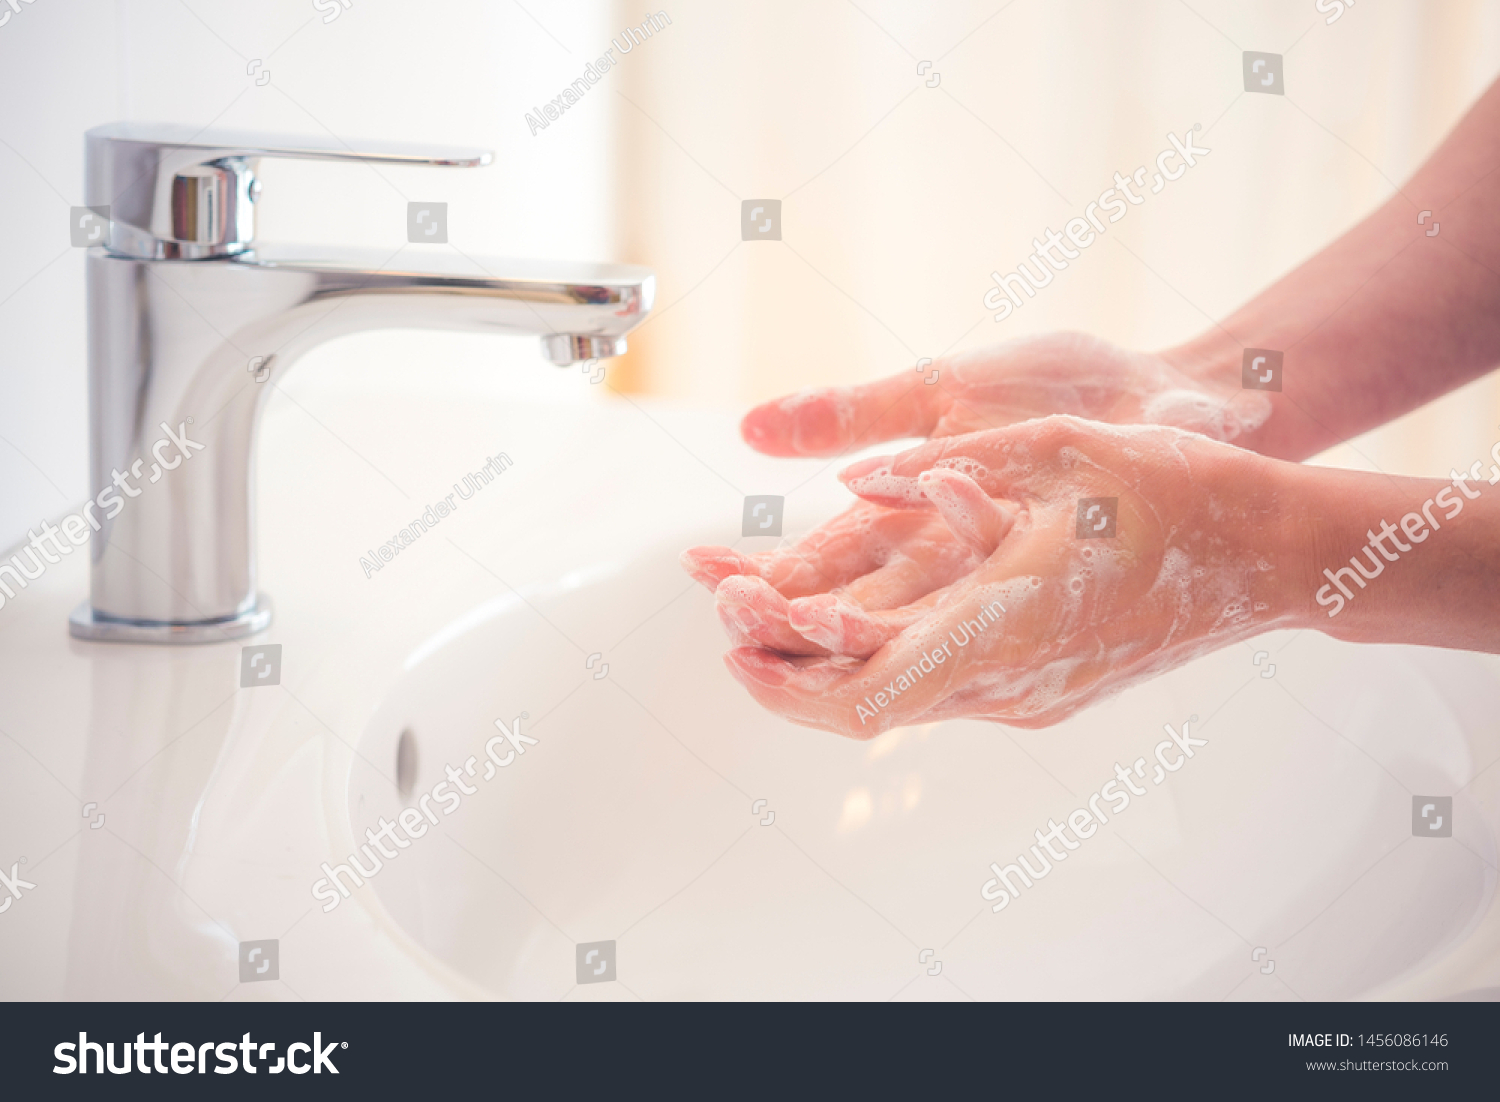 Washing hands with soap under the faucet with water. Hygiene concept. #1456086146